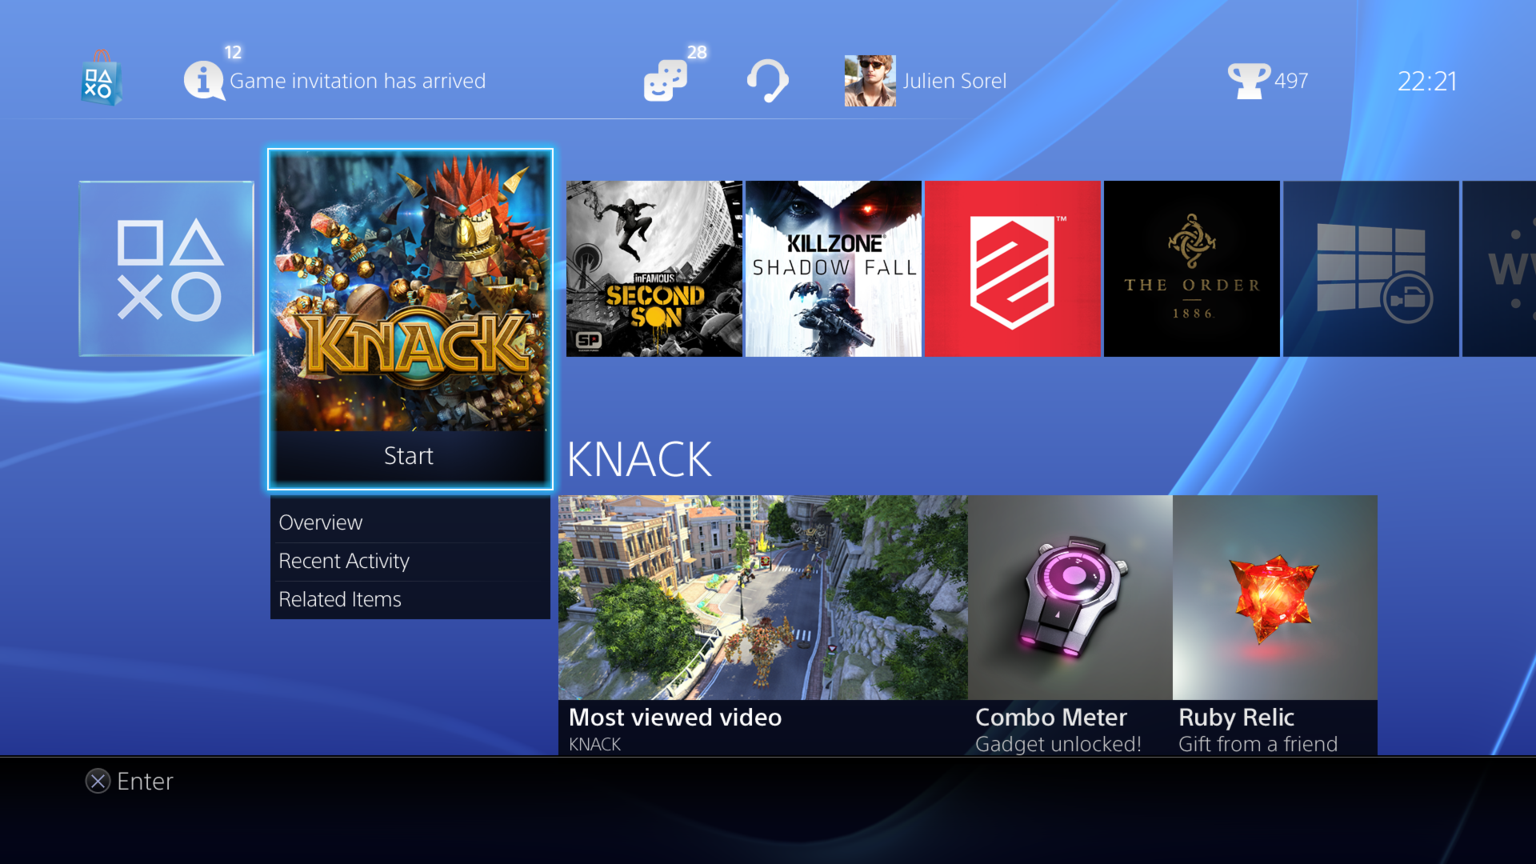 PS4 UI Walkthrough – DVR, Twitch, Apps, Store (Playstation 4 User Interface)